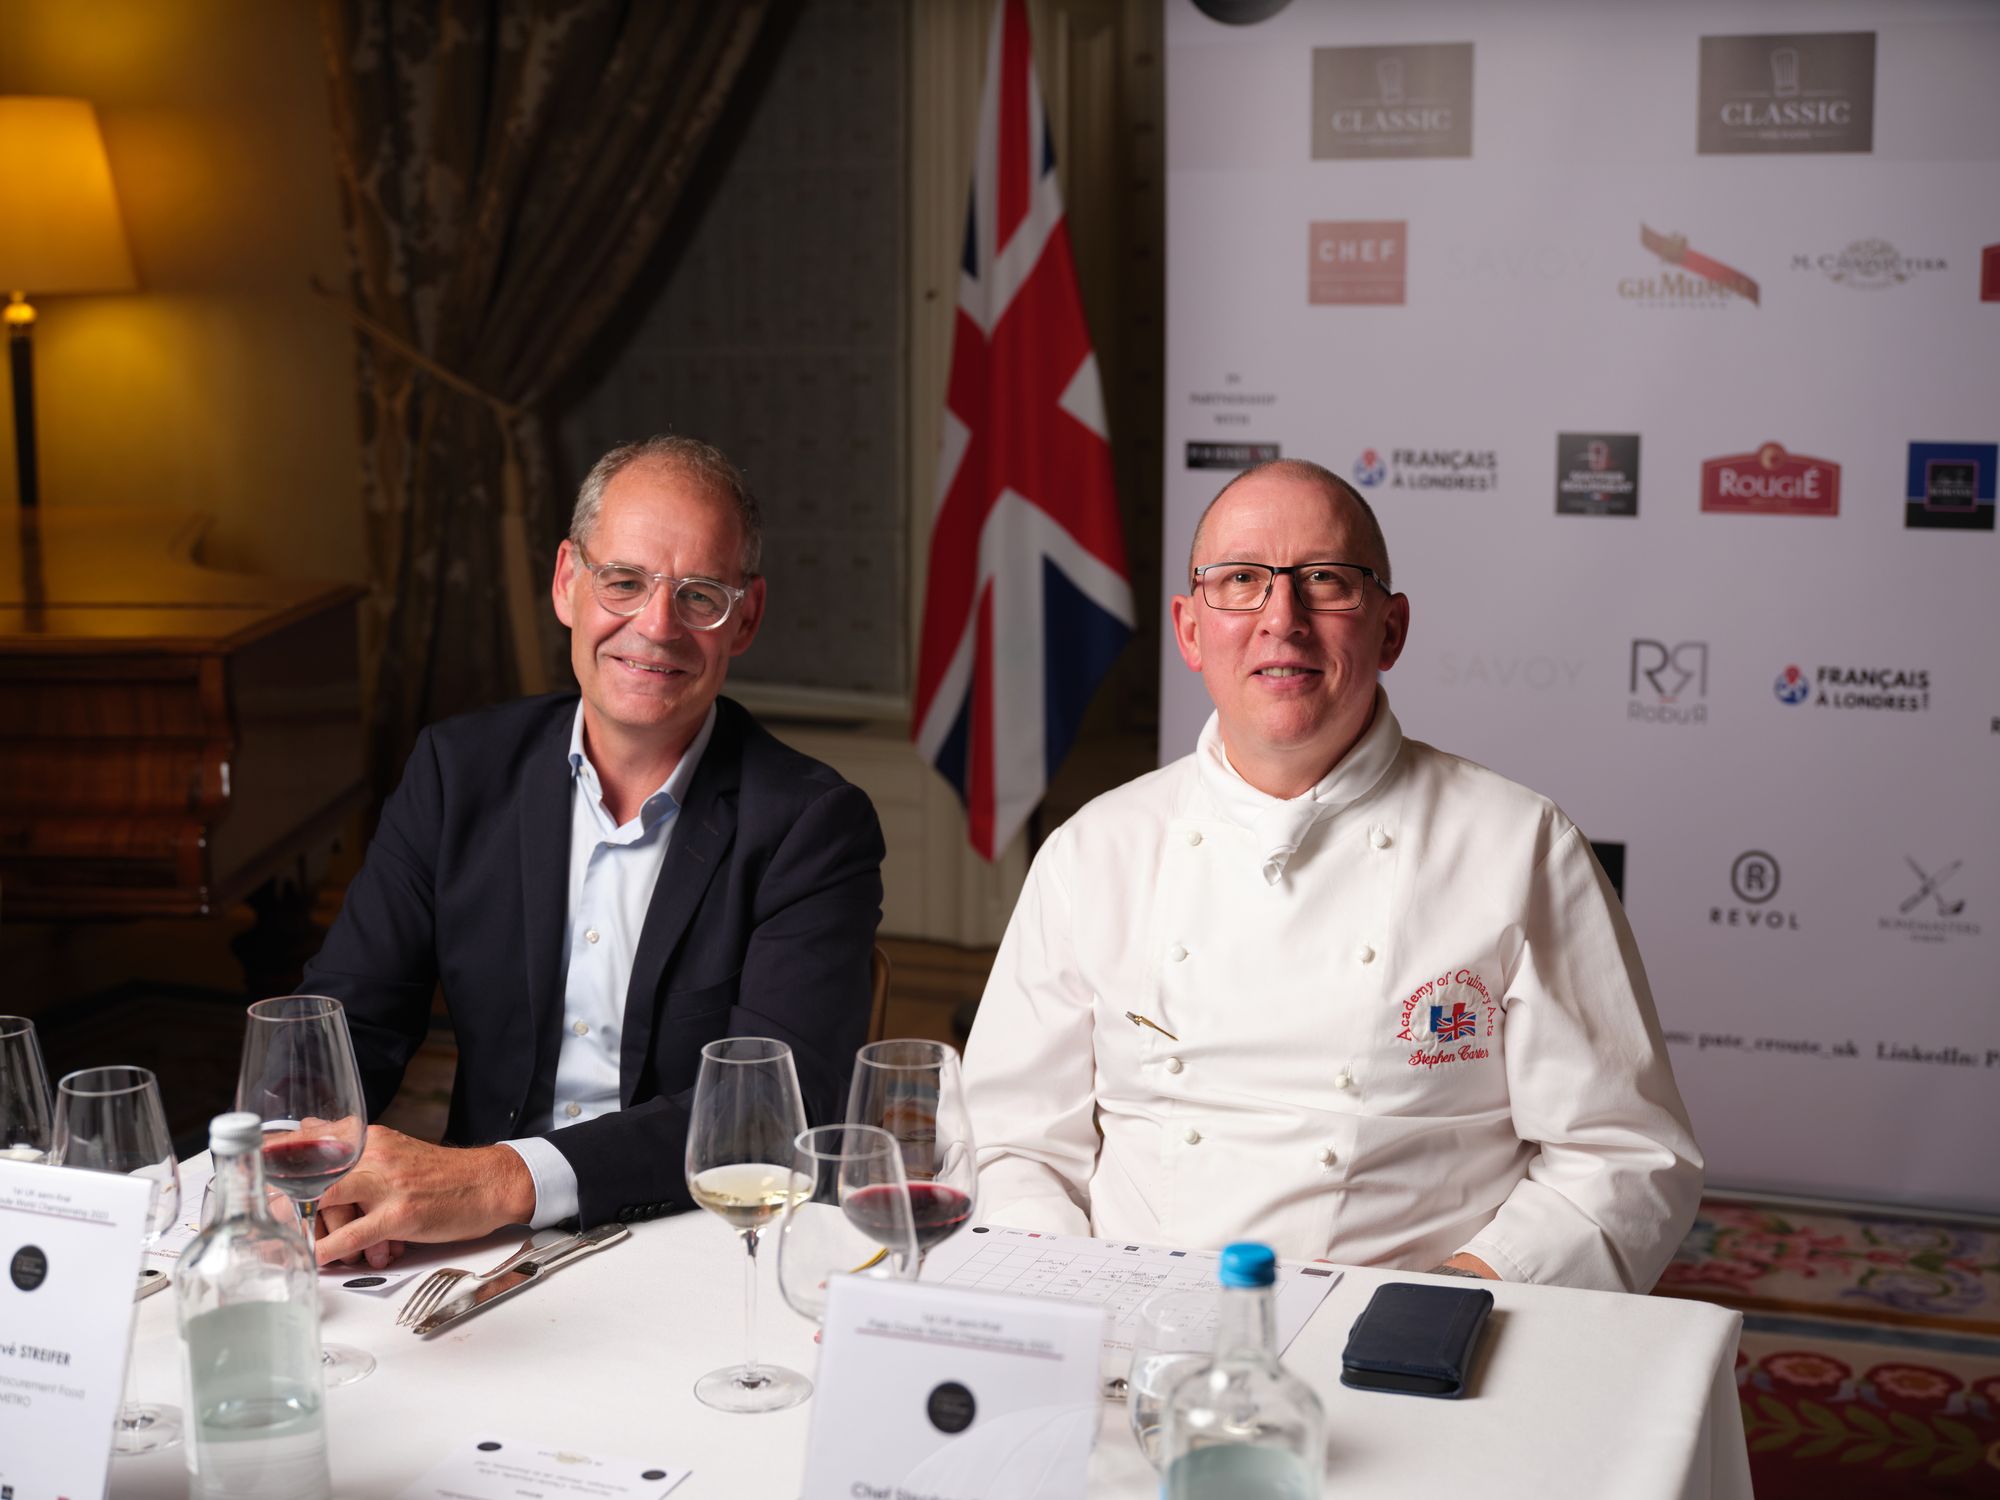 UK finals 2024 - Presented by Classic Fine Foods